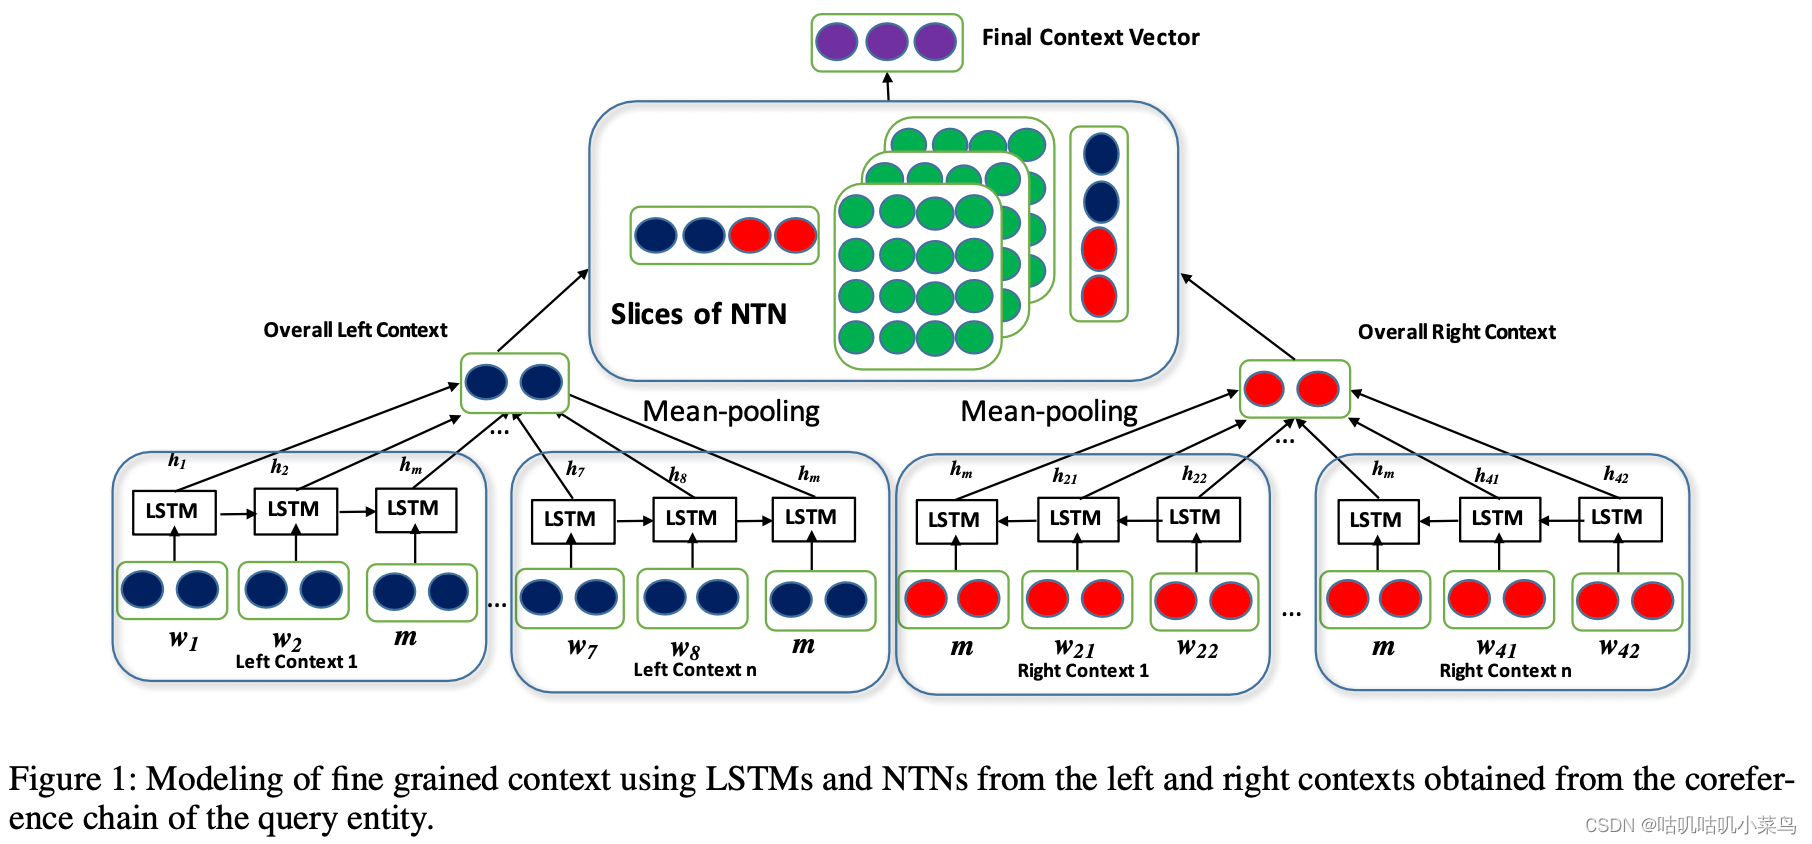 Modeling of fine-grained context using LSTMS and NTNs